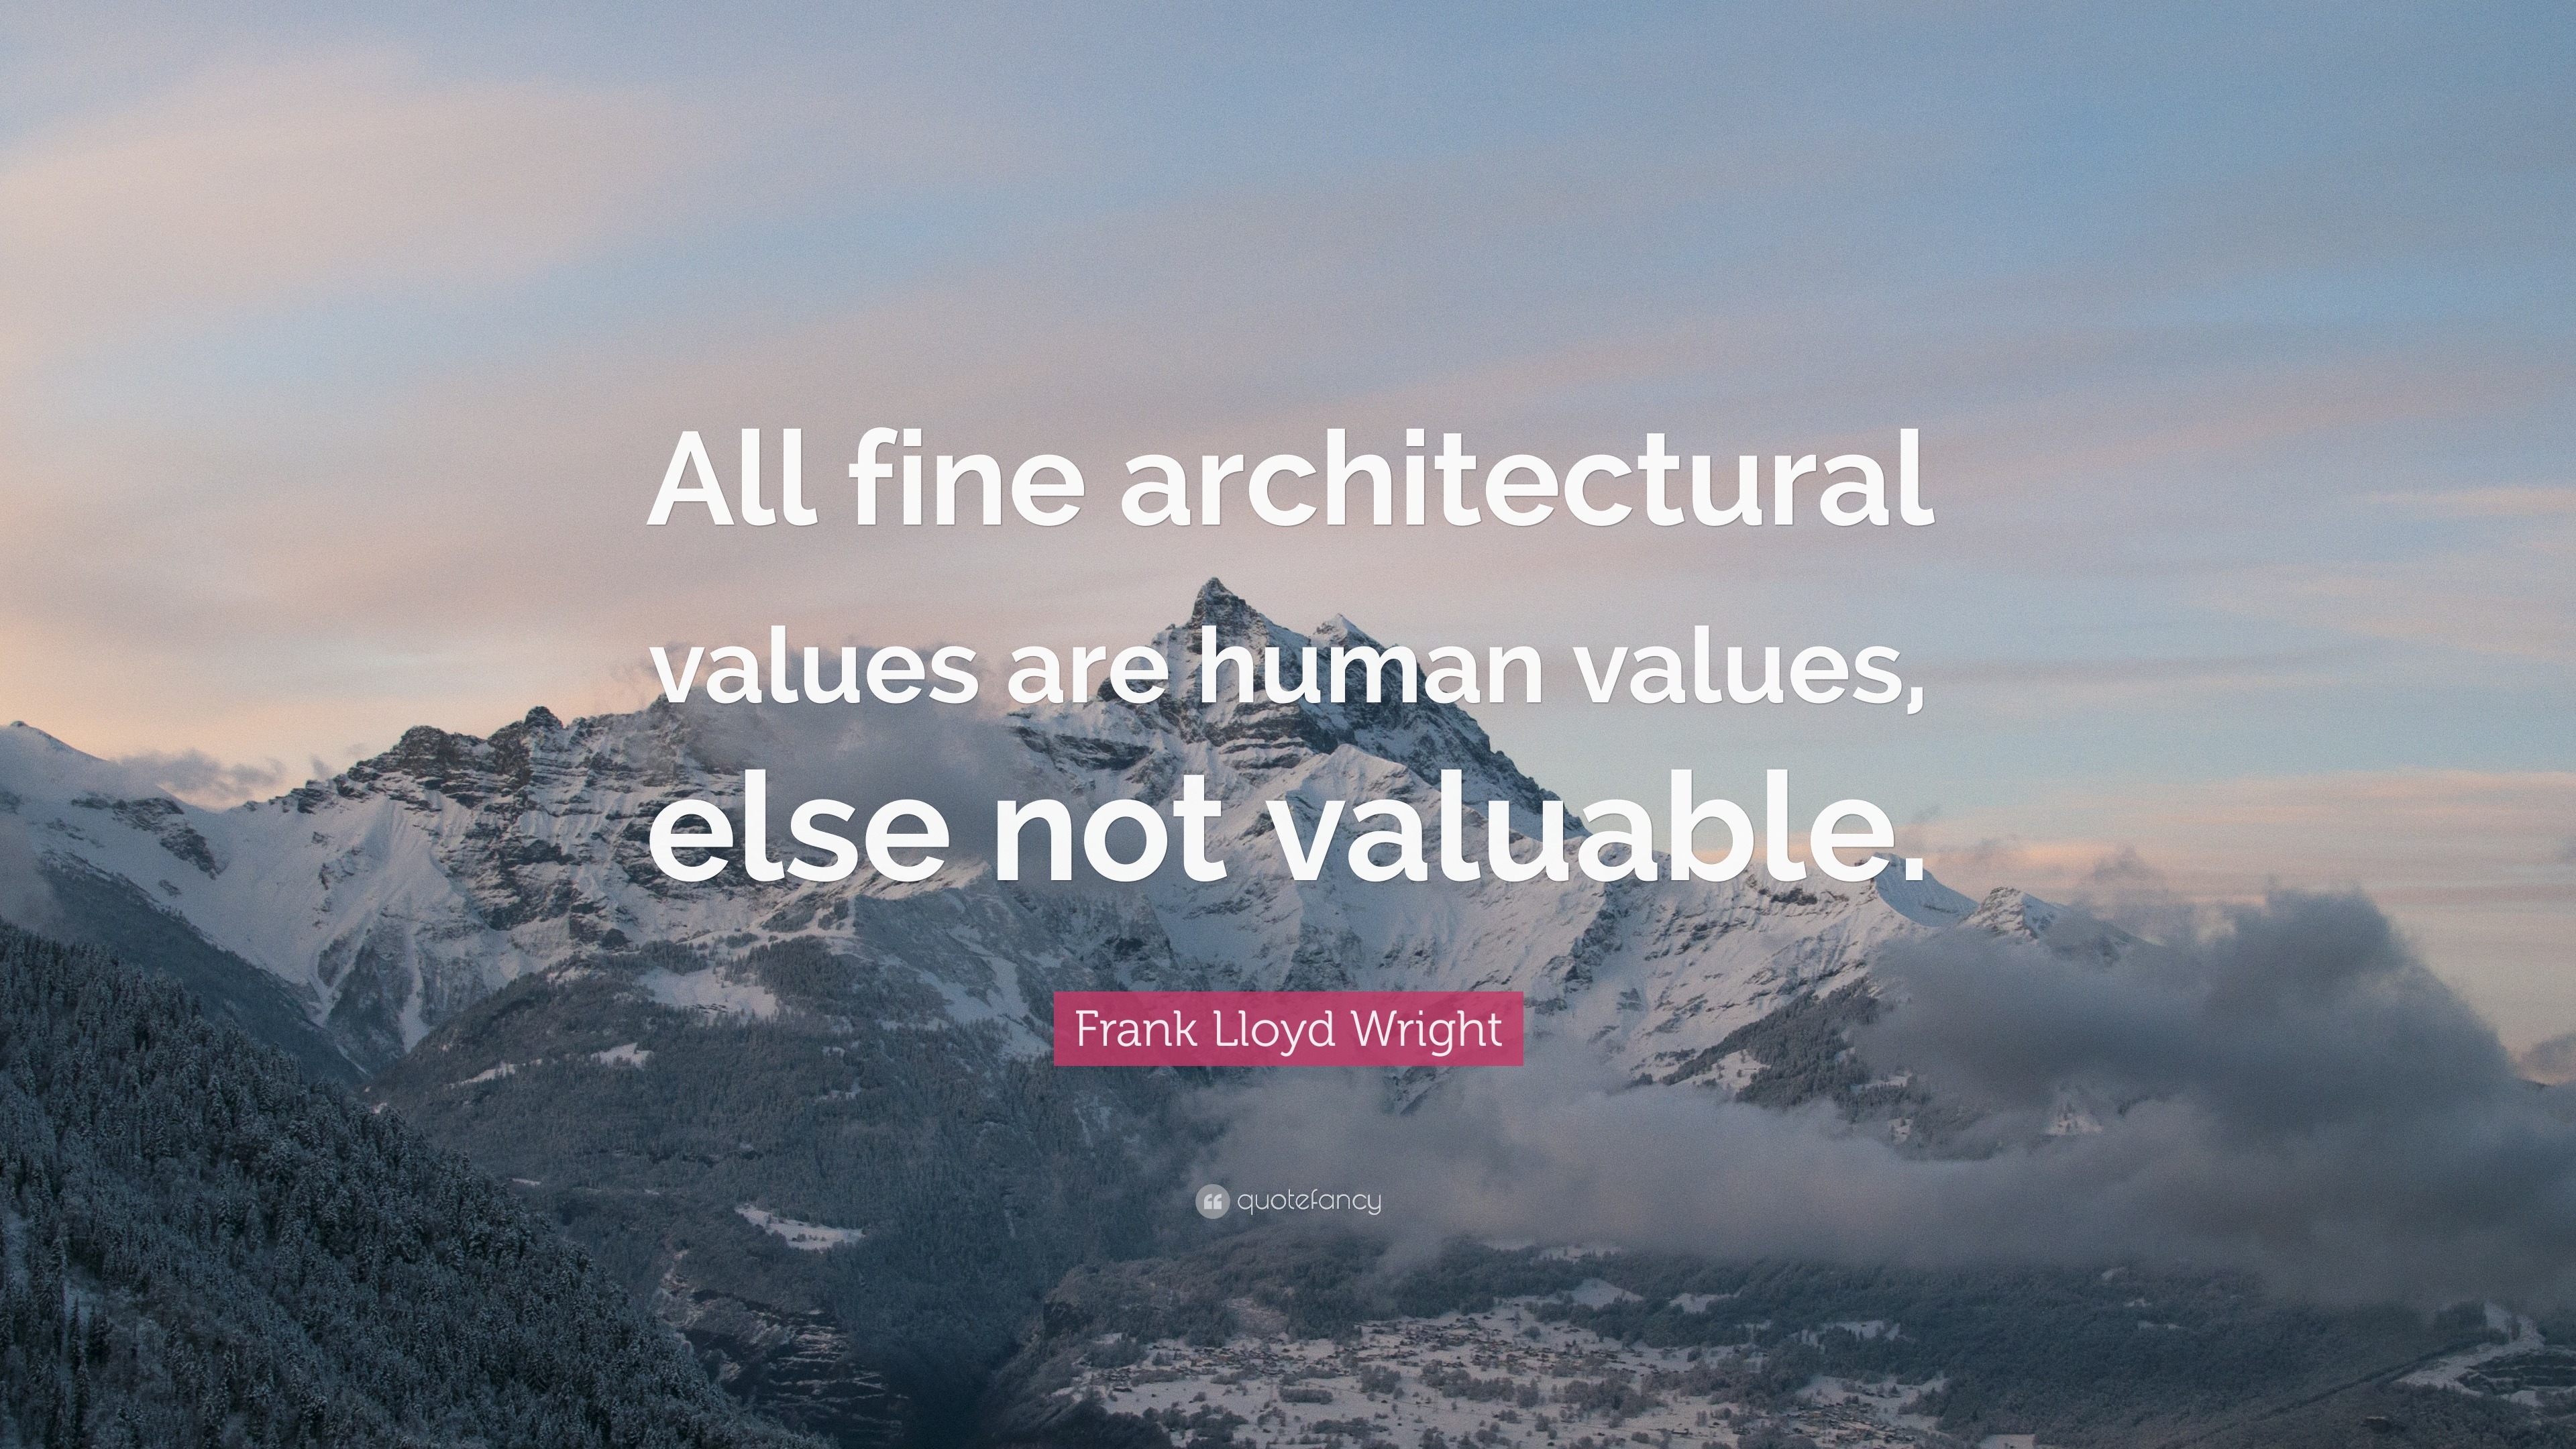 Frank Lloyd Wright Quote: “All fine architectural values are human ...